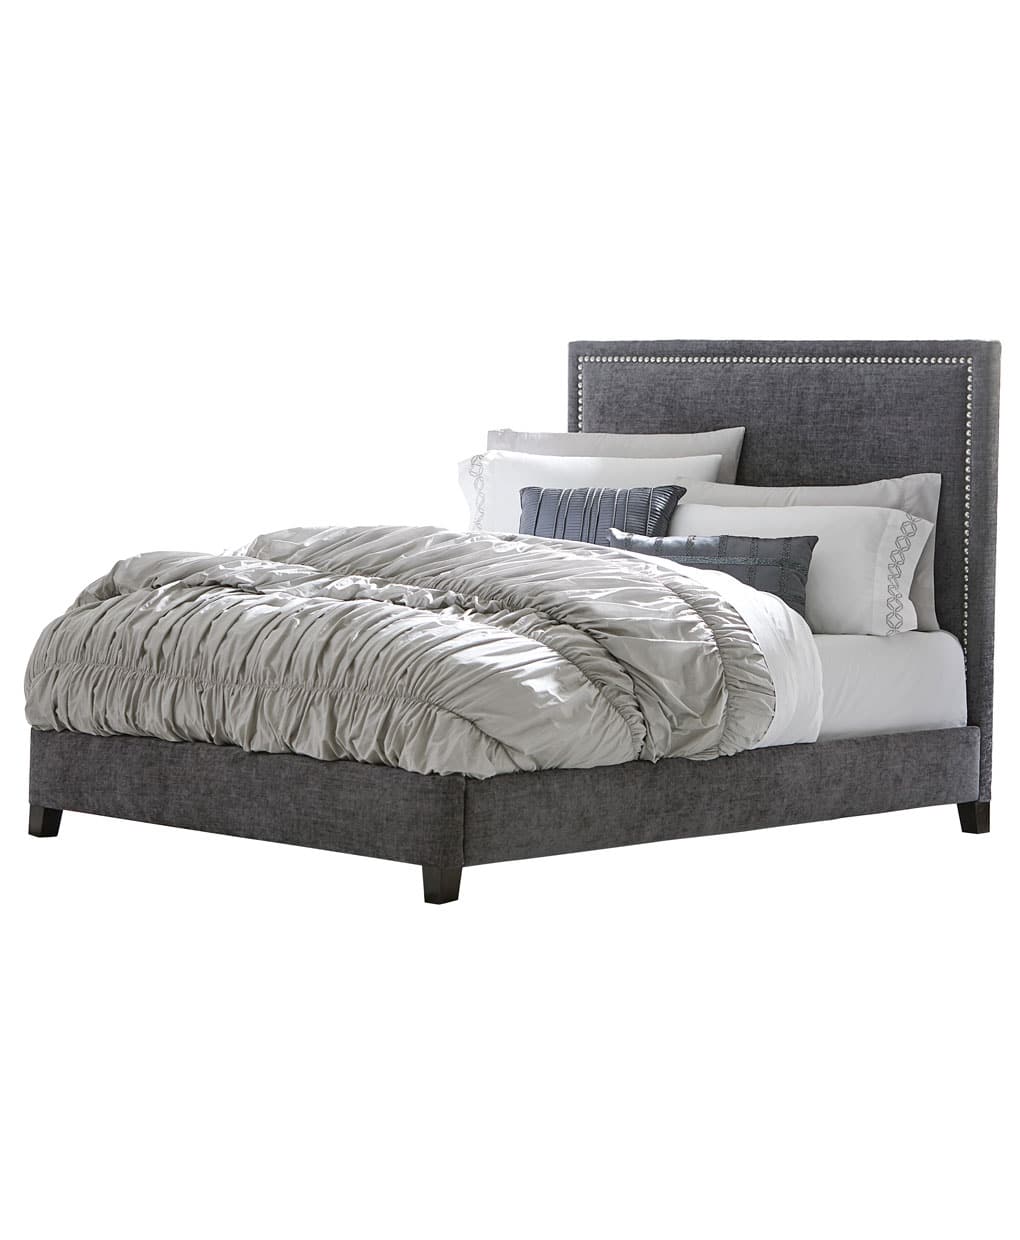 Adessa Amish Full Upholstered Bed